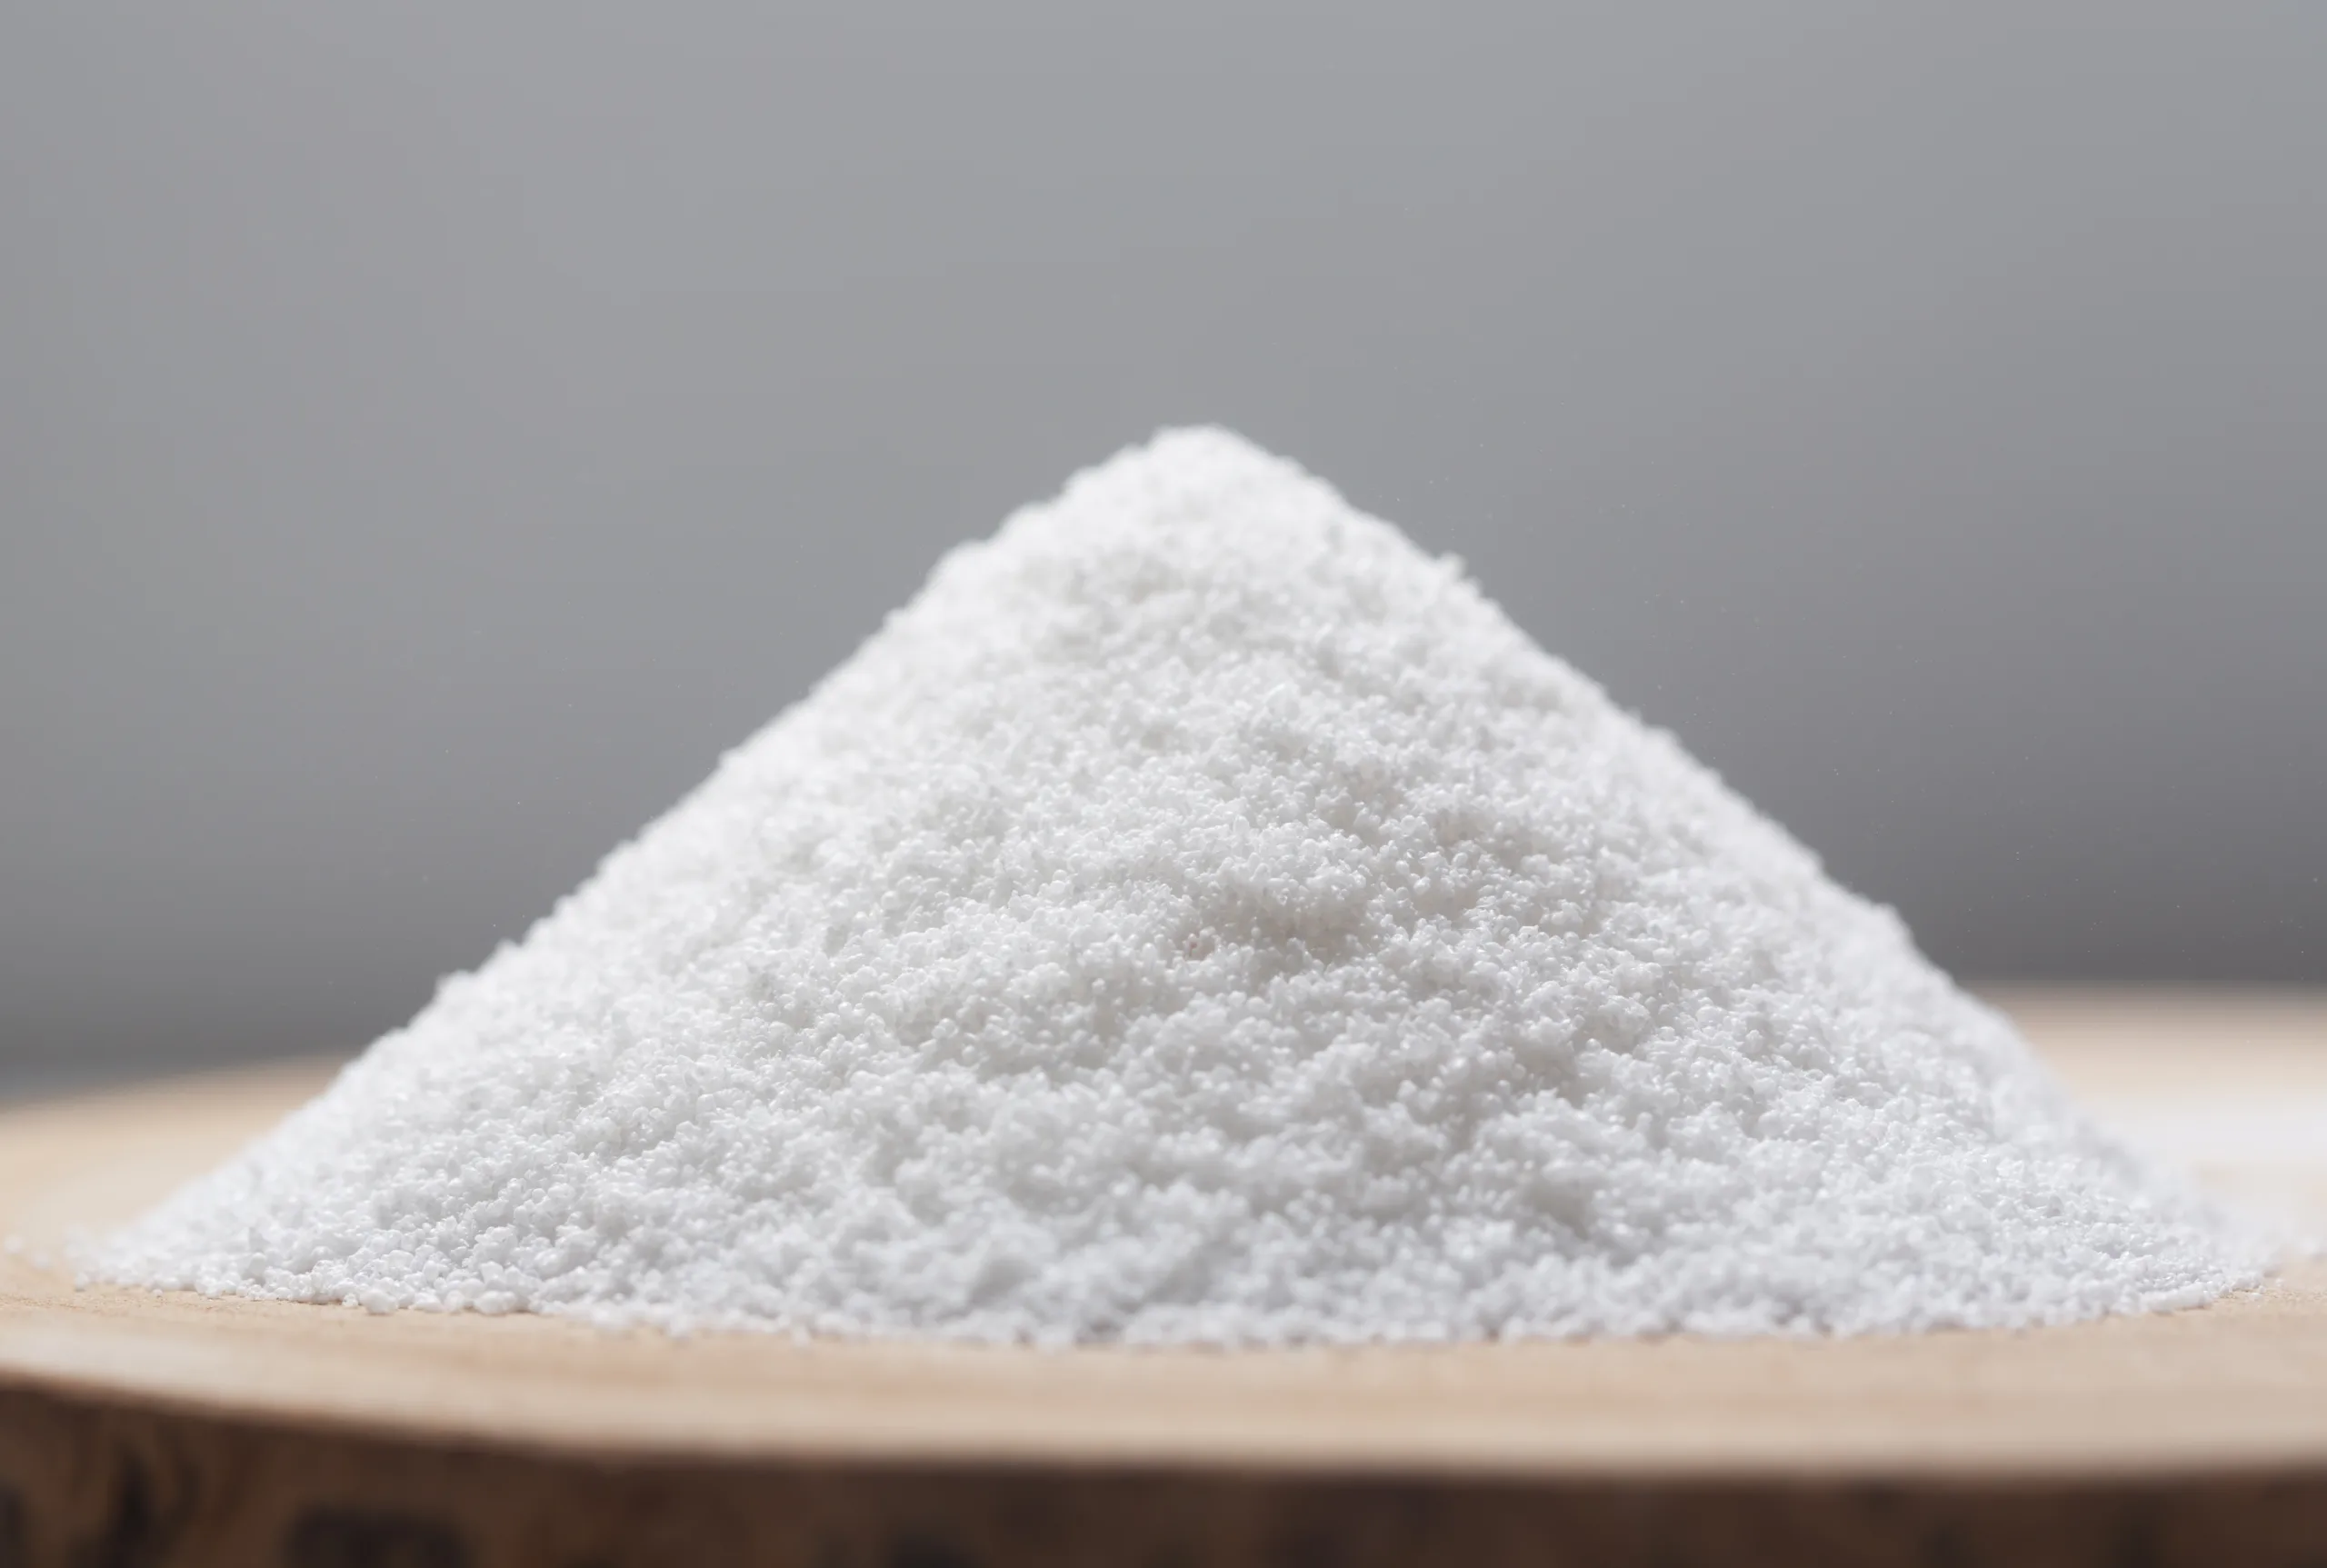 White crystalline aspartame powder, a low-calorie sweetener used as a sugar substitute in food and drinks.